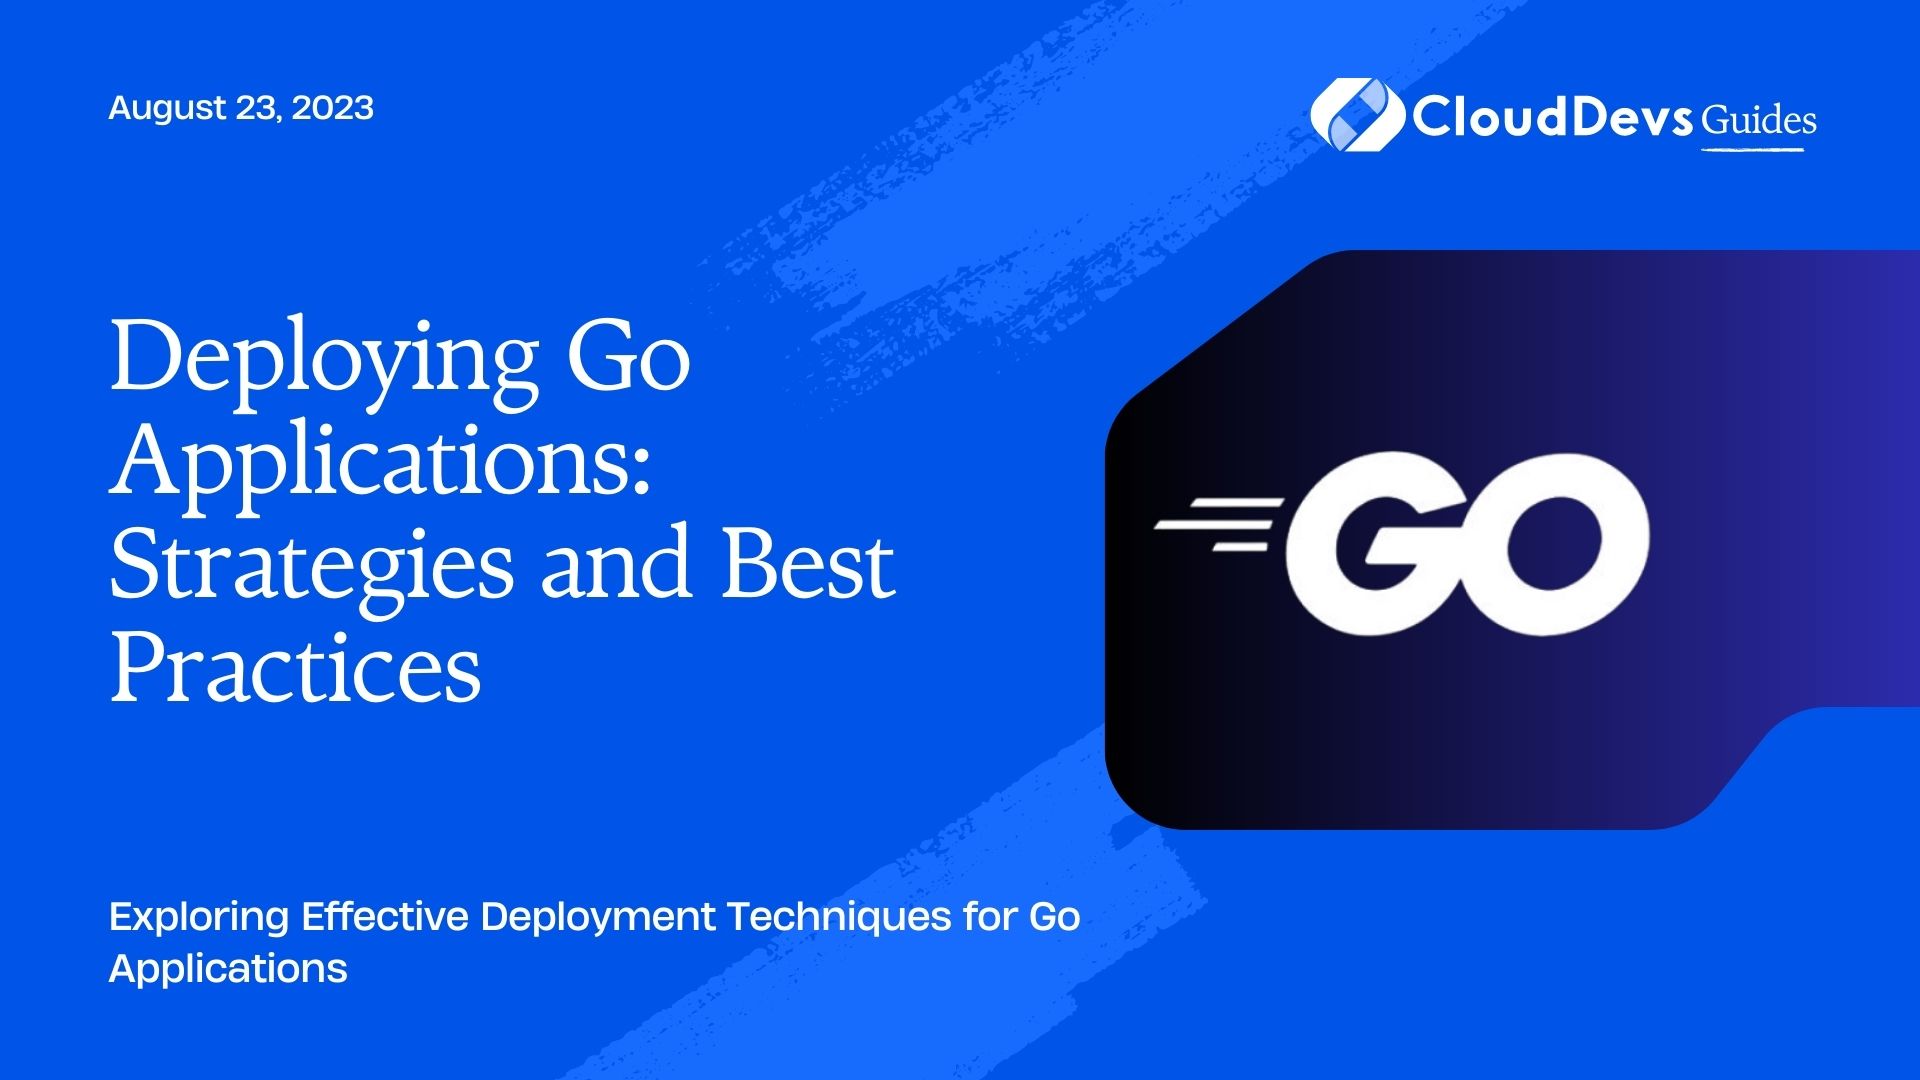 Deploying Go Applications: Strategies and Best Practices